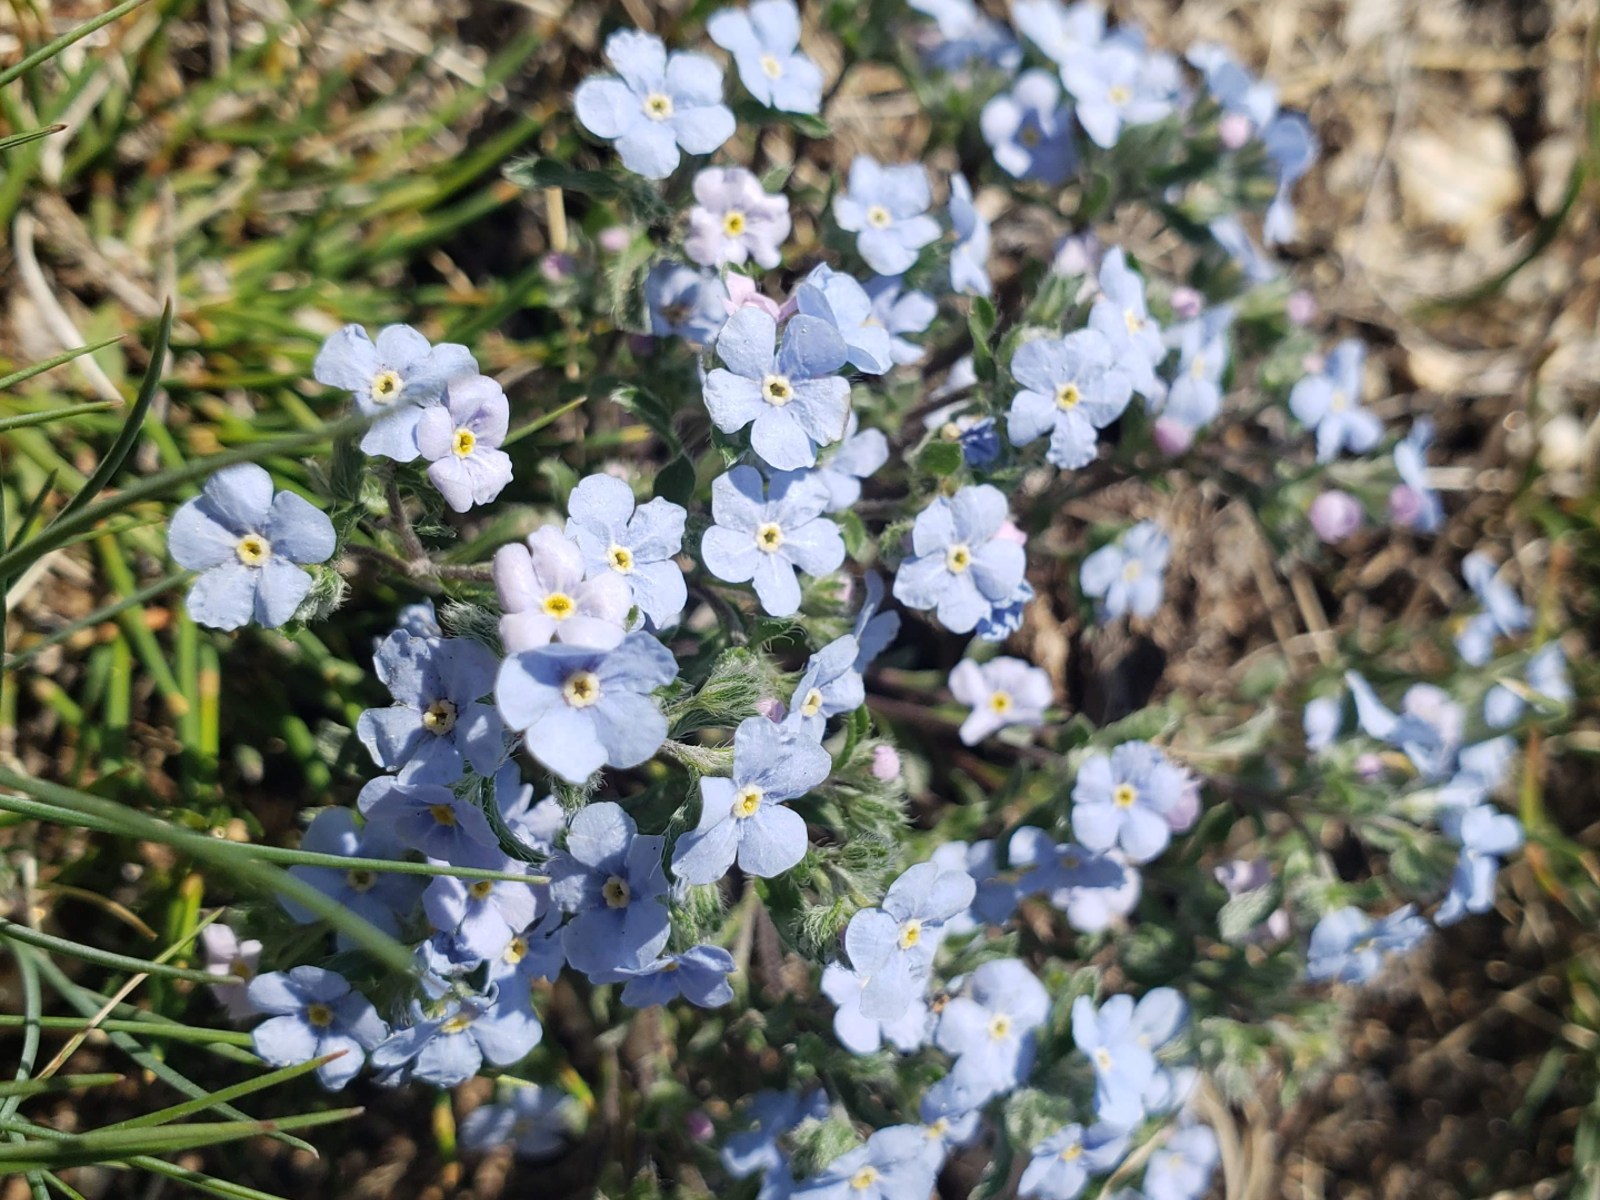 Small purple and blue flowers.